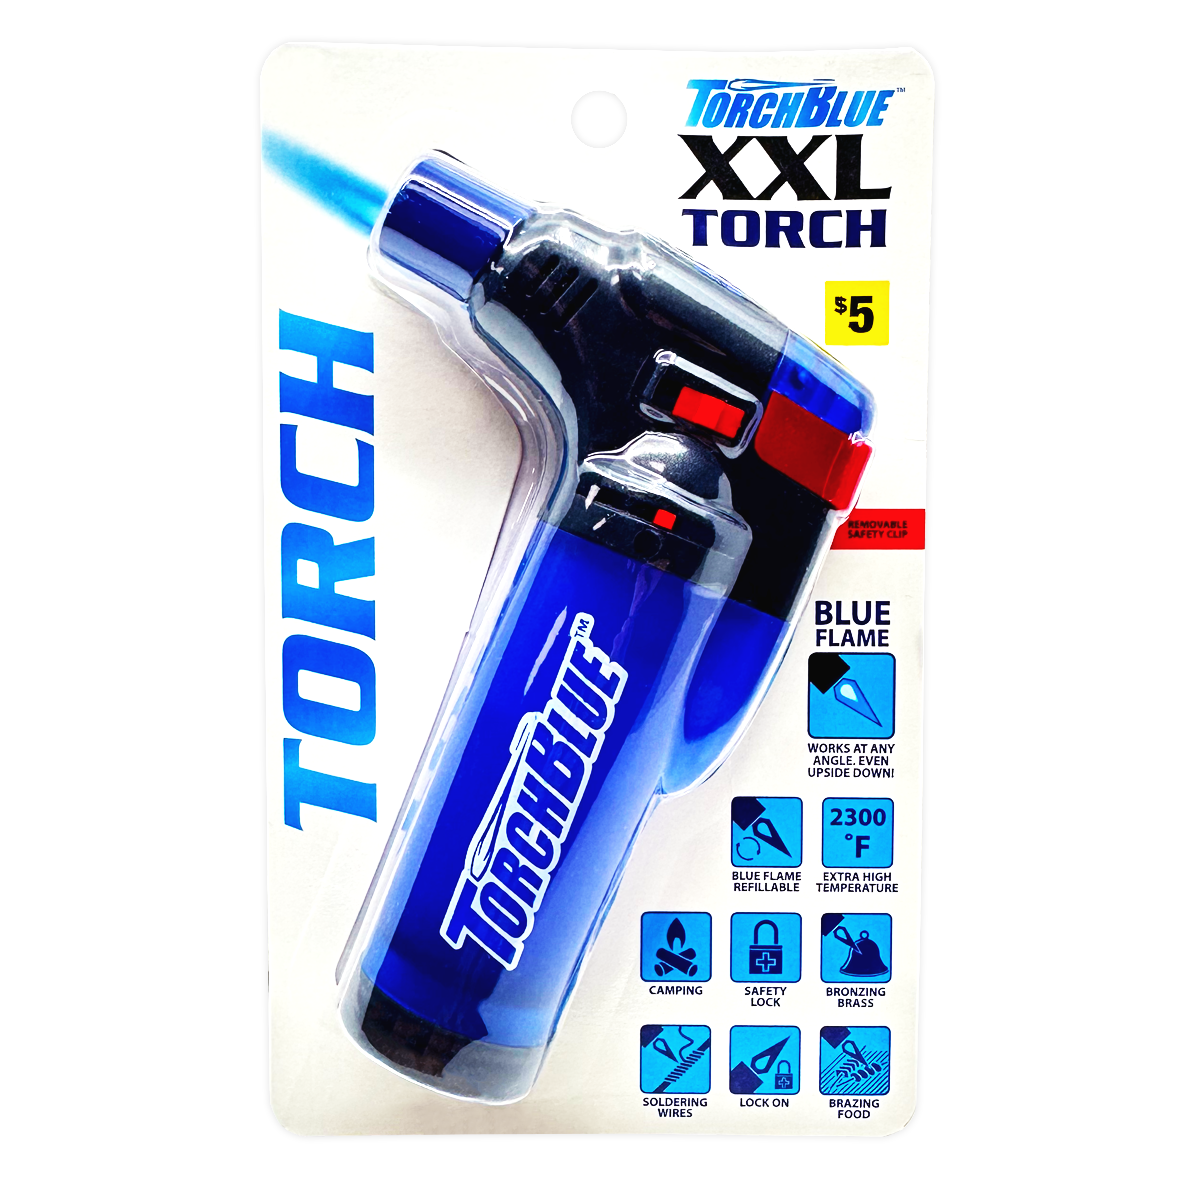 XXL Torch Lighter in Blister Pack - 6 Pieces Per Pack 41521